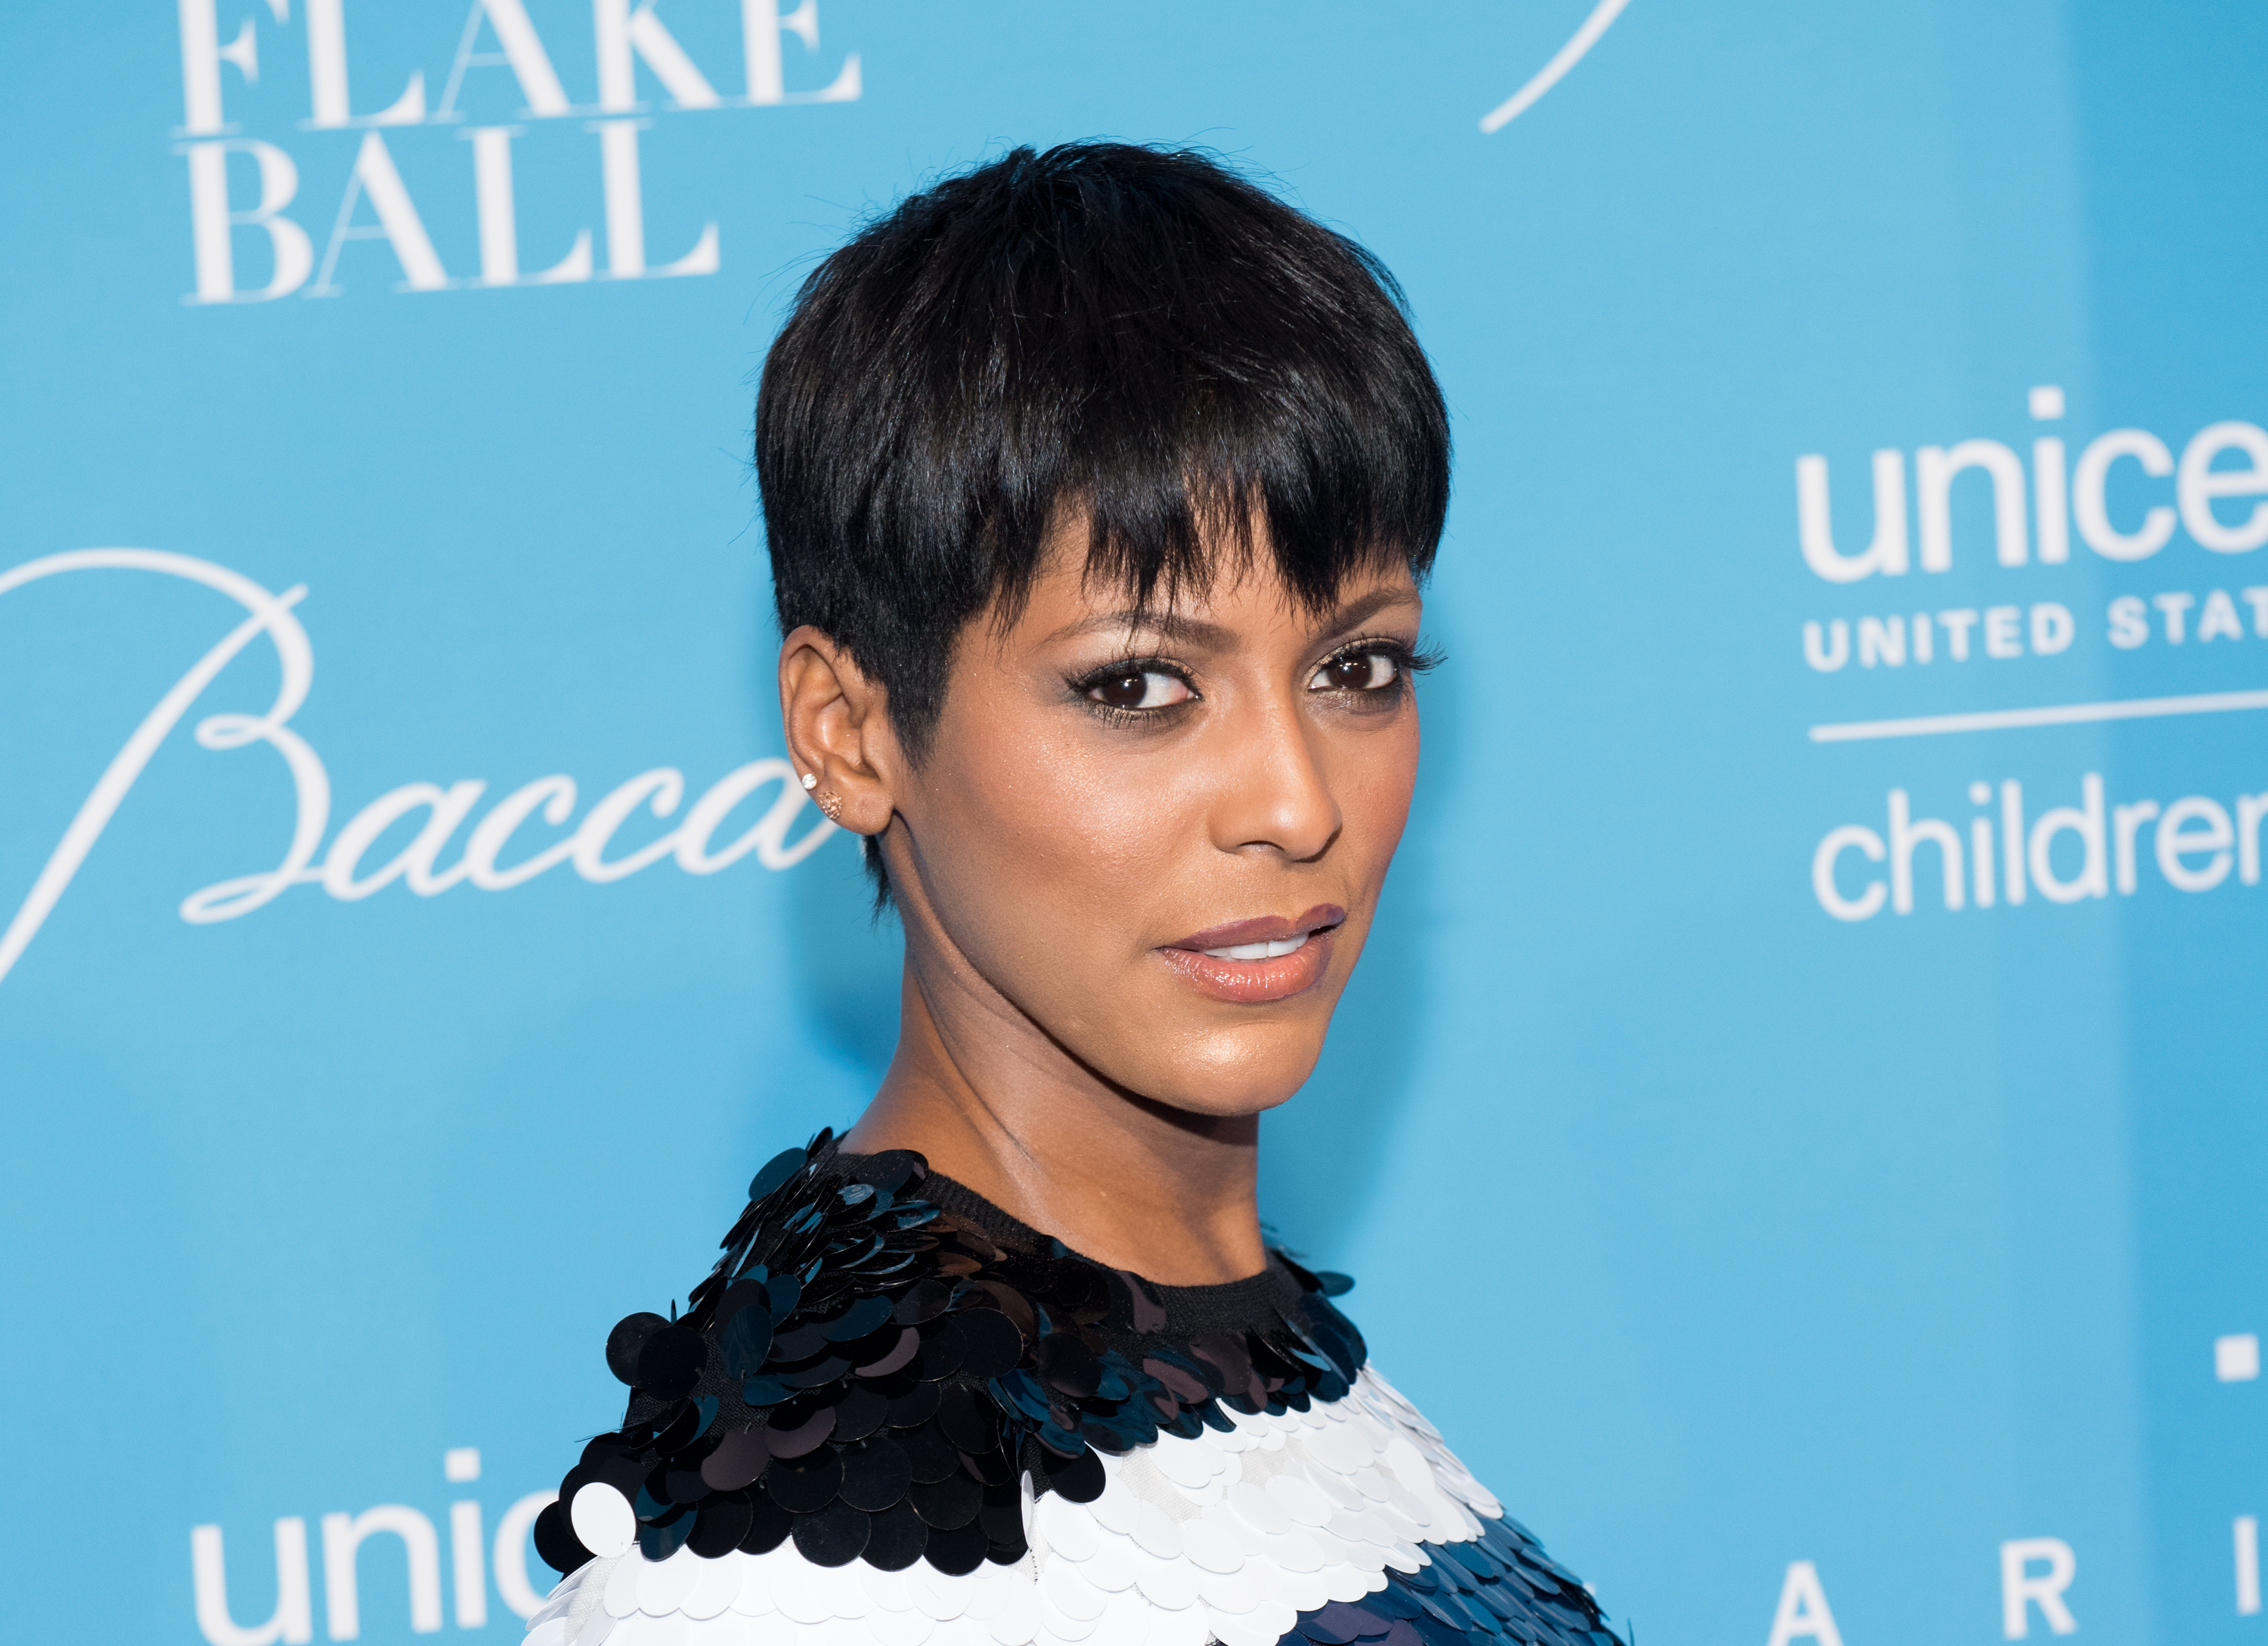 NEW YORK, NY - NOVEMBER 29:  Tamron Hall attends the 12th Annual UNICEF Snowflake Ball at Cipriani Wall Street on November 29, 2016 in New York City.  (Photo by Noam Galai/WireImage) (Noam Galai&mdash;WireImage)